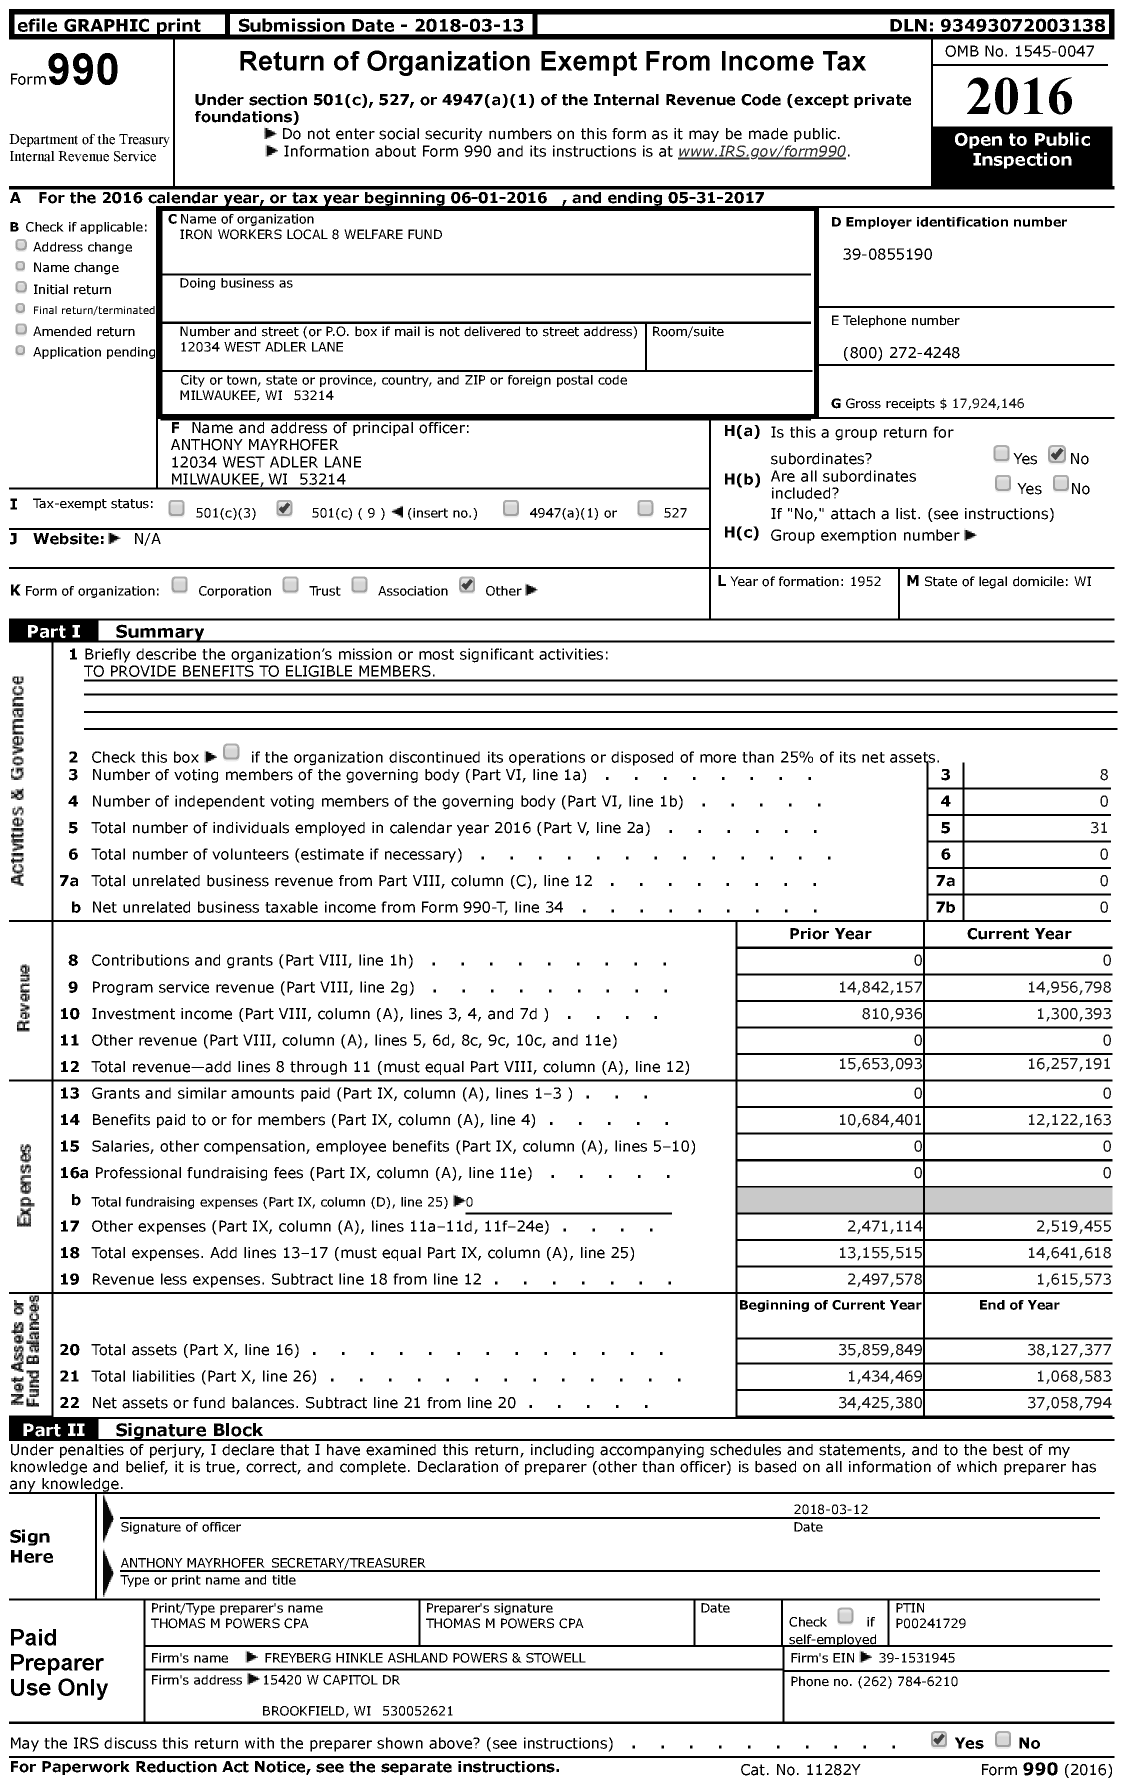 Image of first page of 2016 Form 990 for Iron Workers Local 8 Welfare Fund